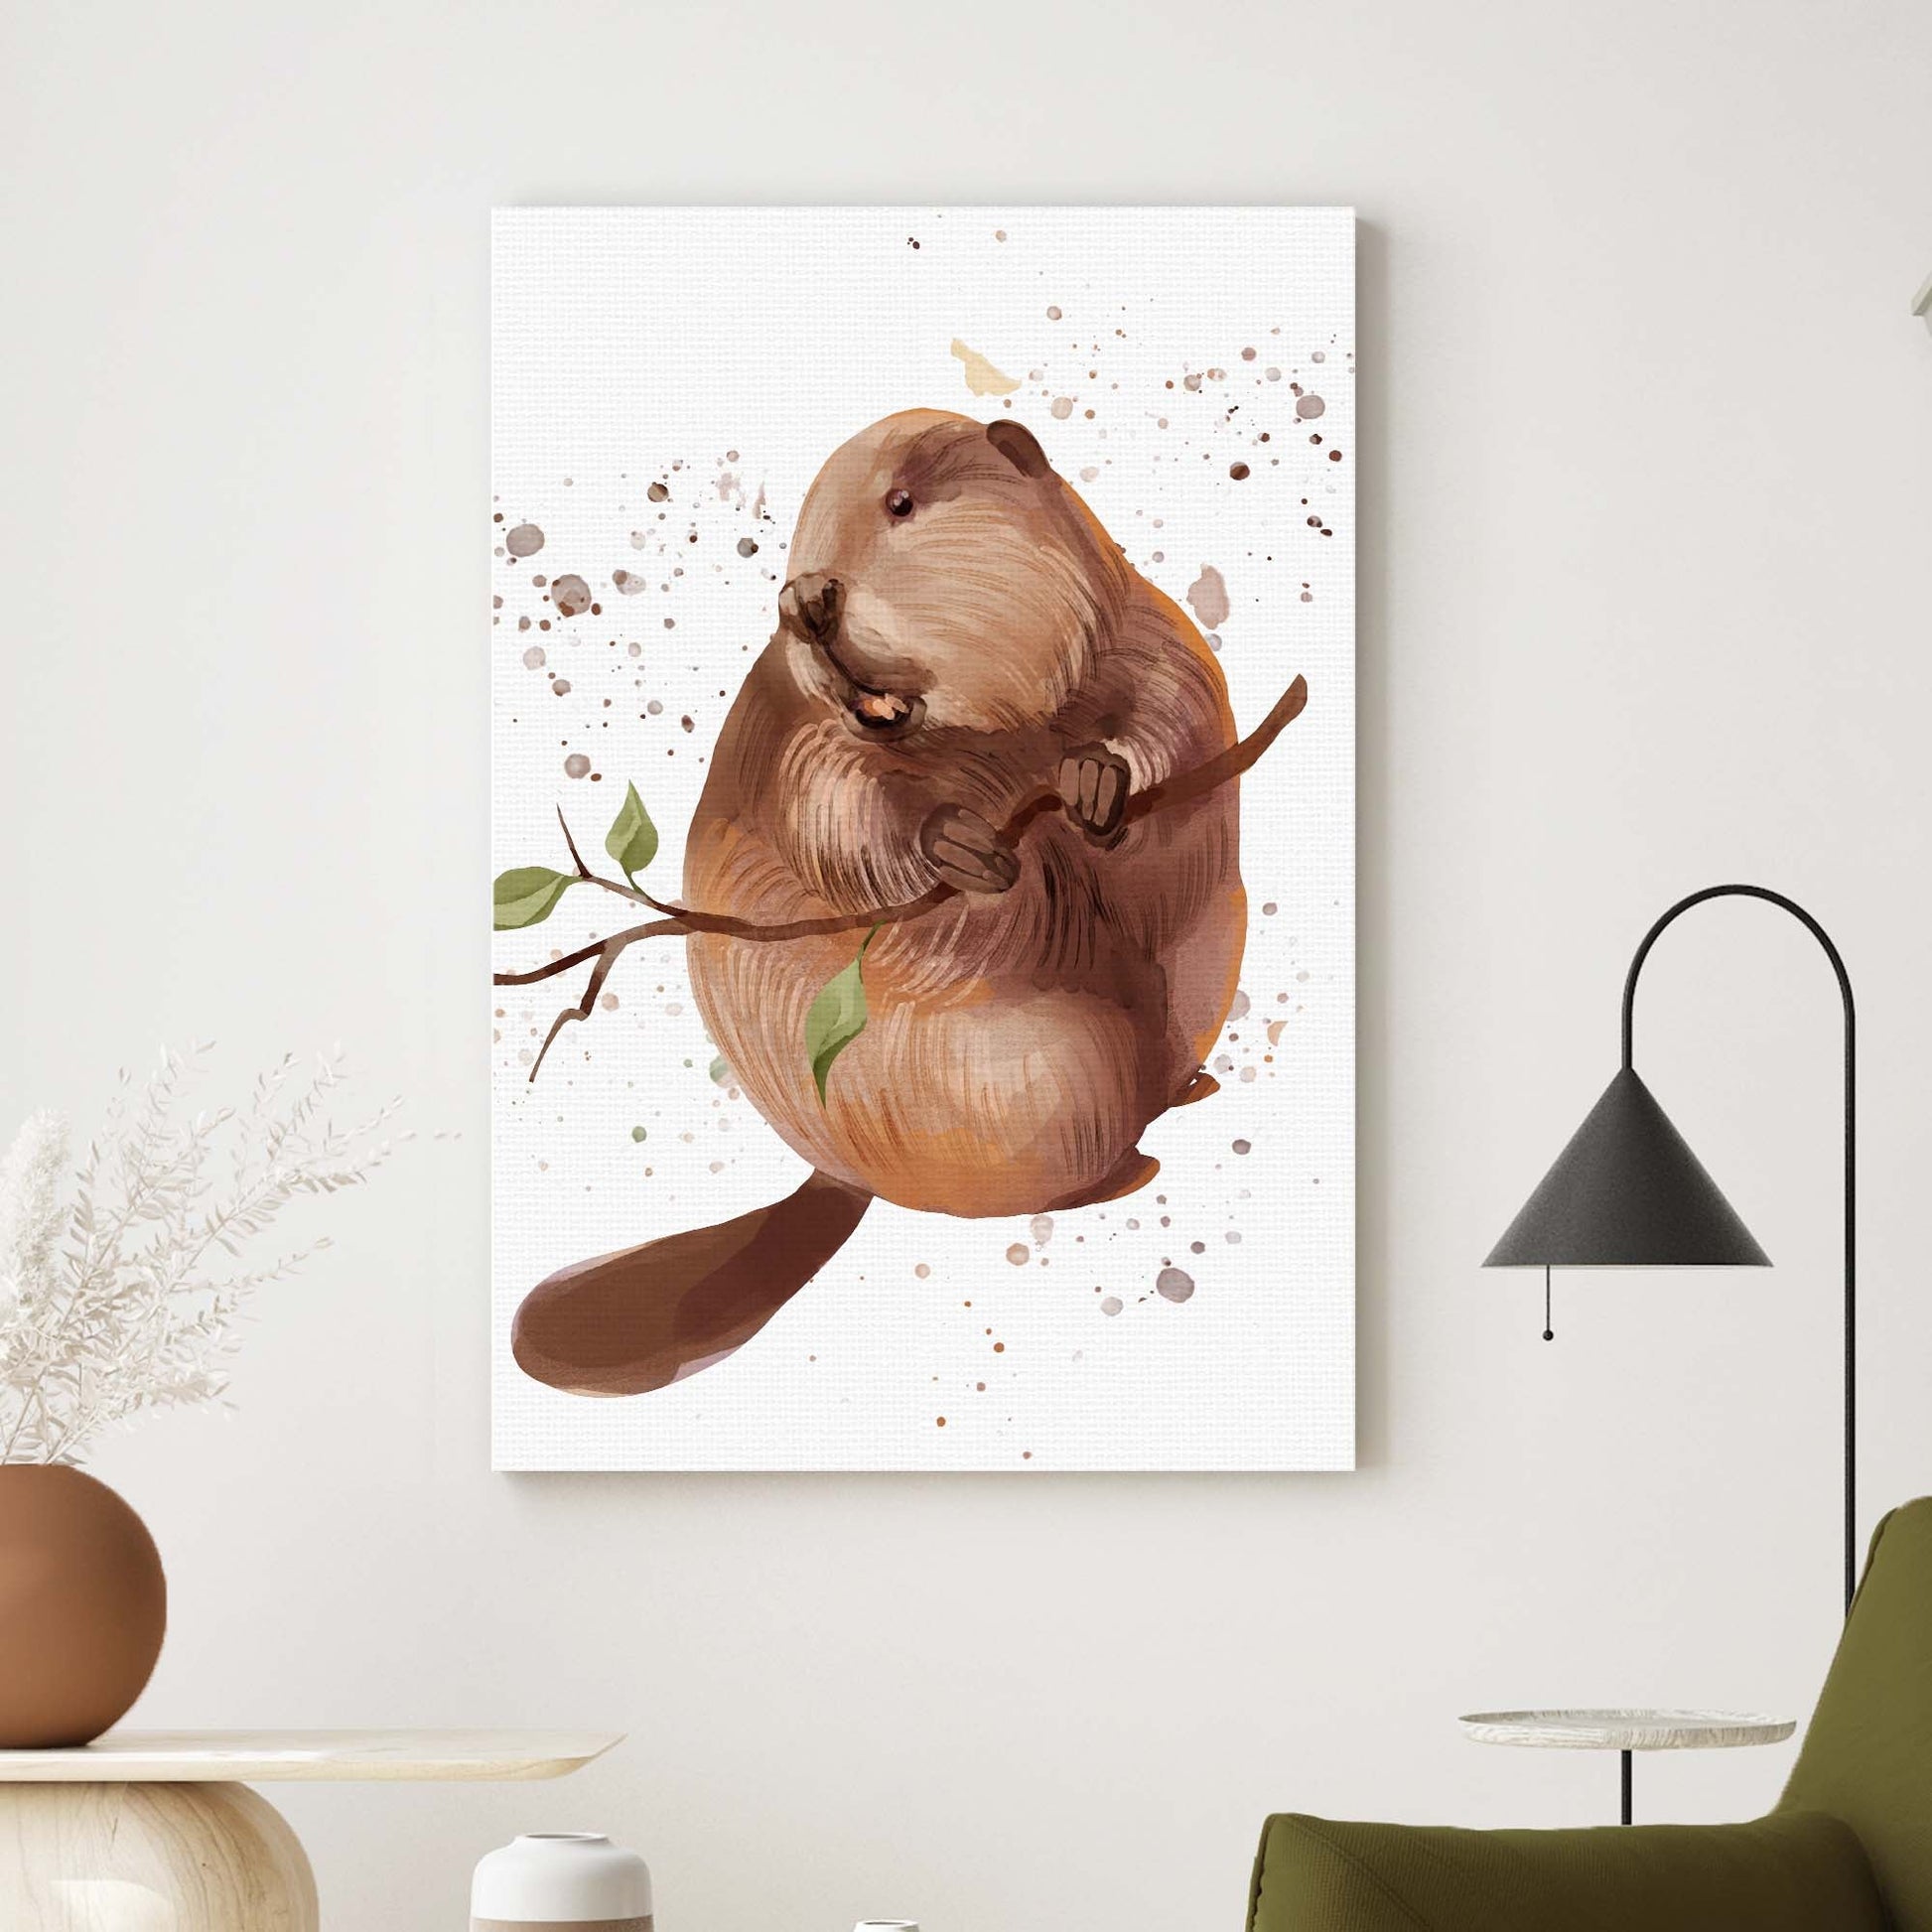 Beaver Nibbling on a Tree Canvas Wall Art in the Woods